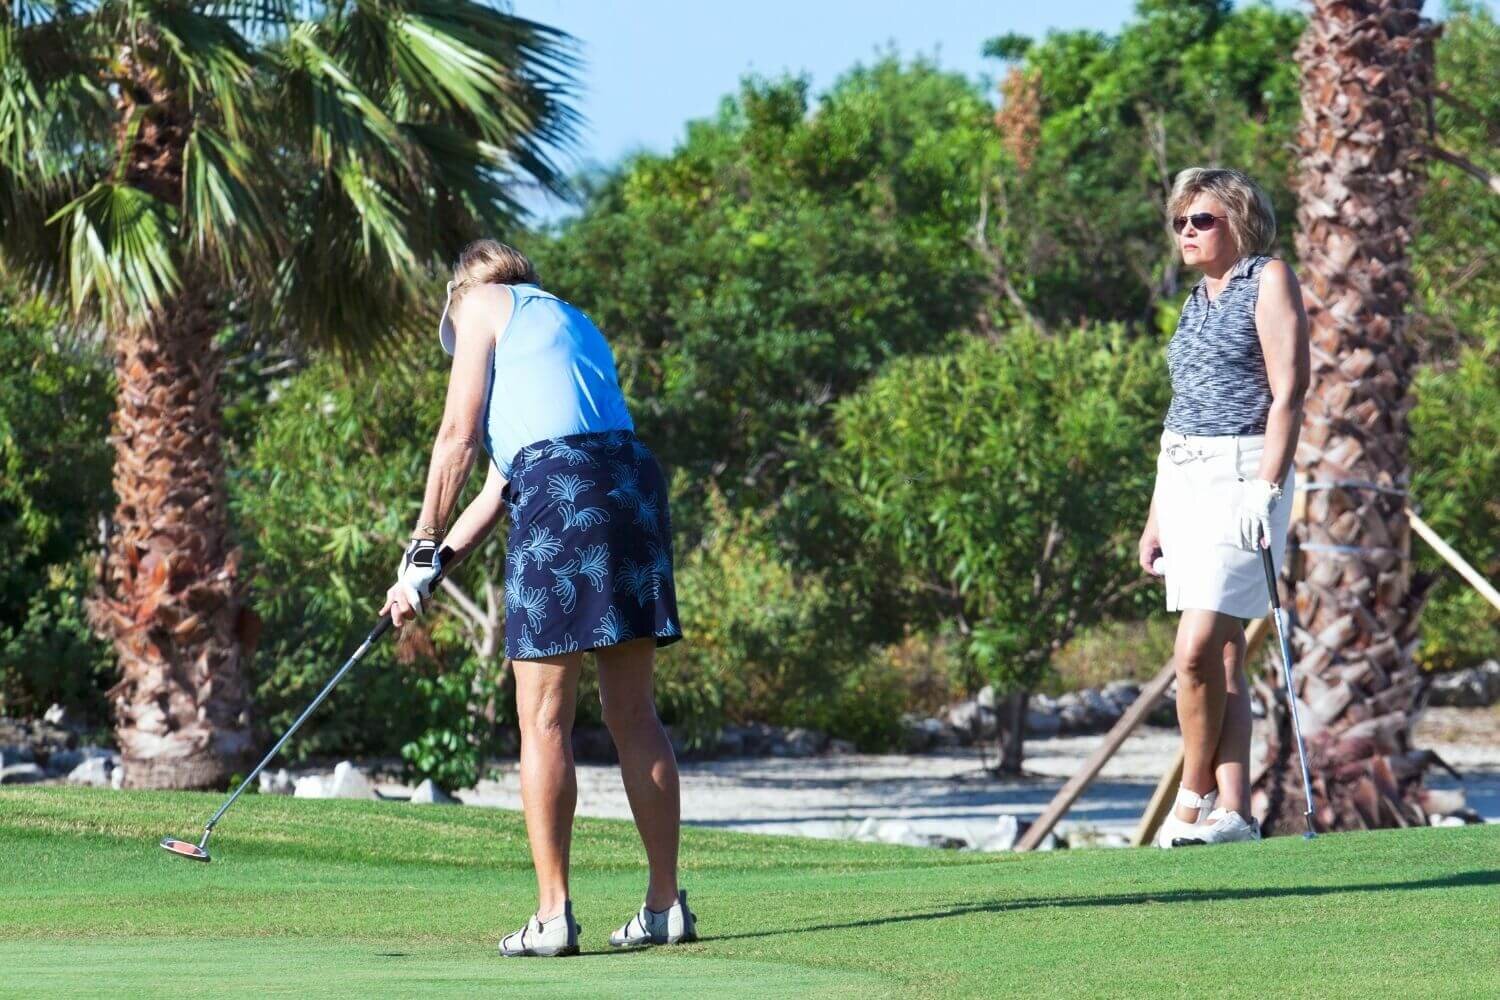 Older woman golfer swinging club while another woman golfer watches and waits for her turn